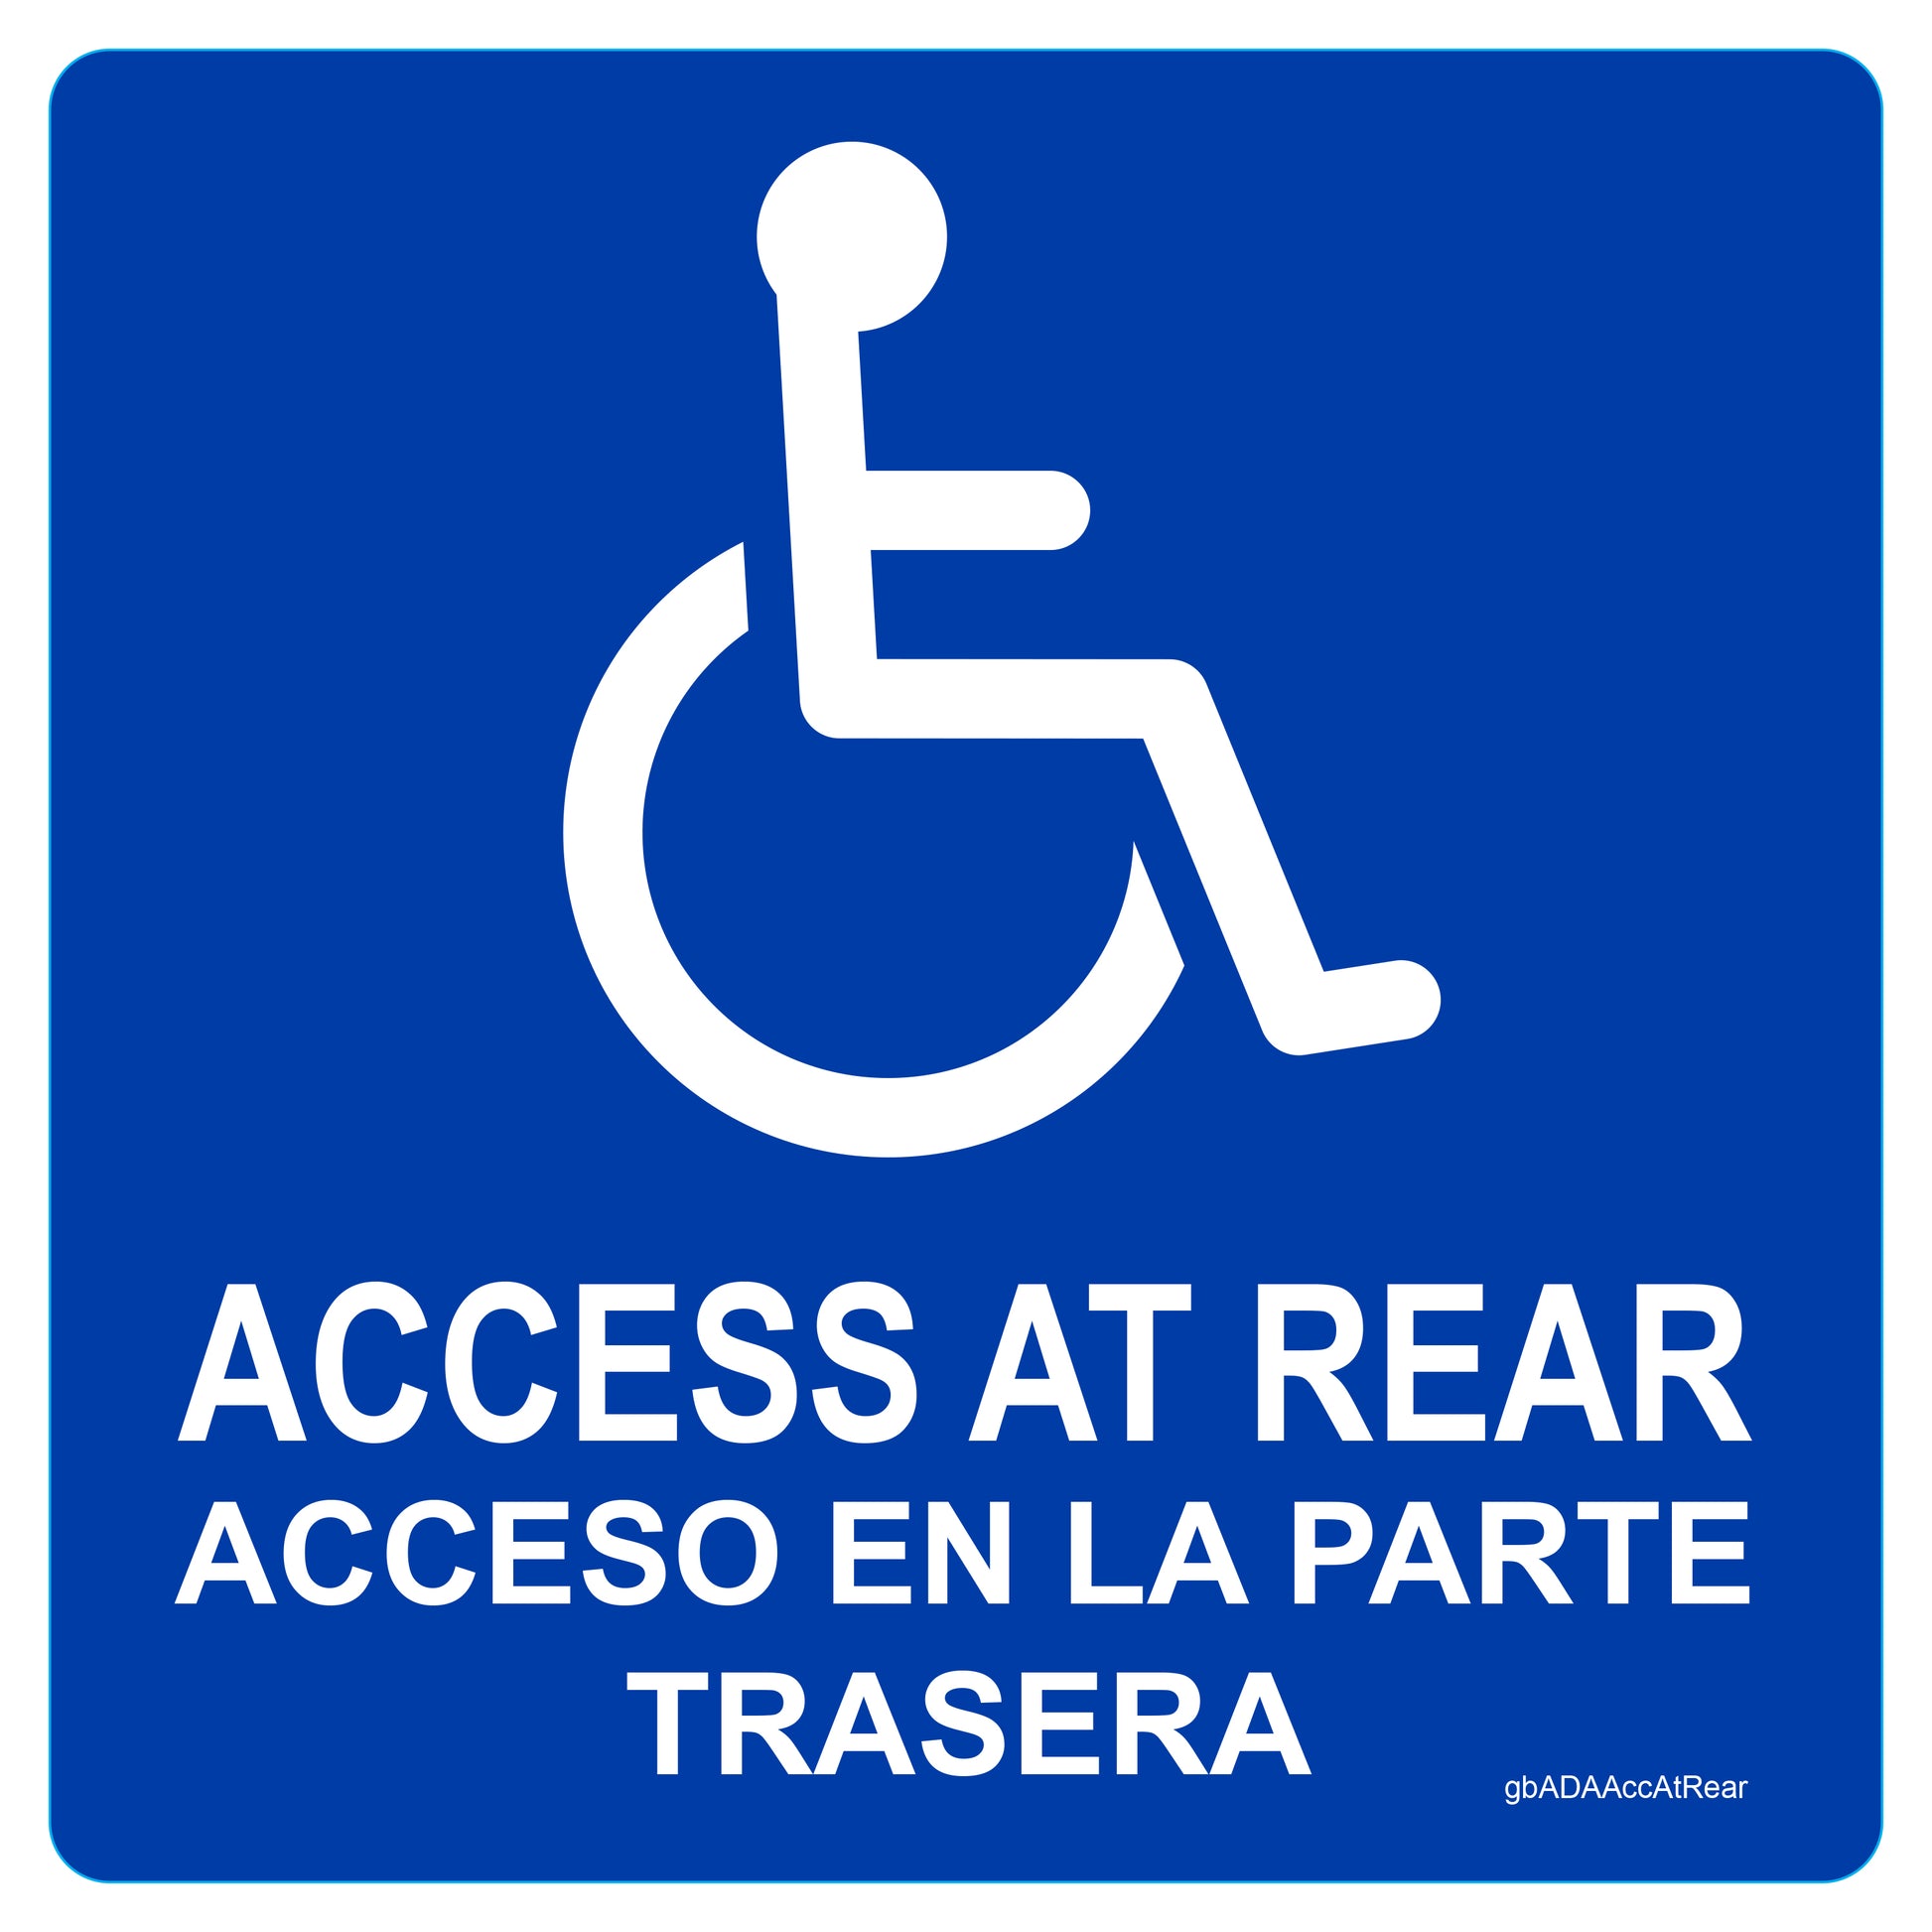 "5" x 5" Bilingual ADA Access at Rear Sticker" - Product image of the sticker with a clear view of the design and size.